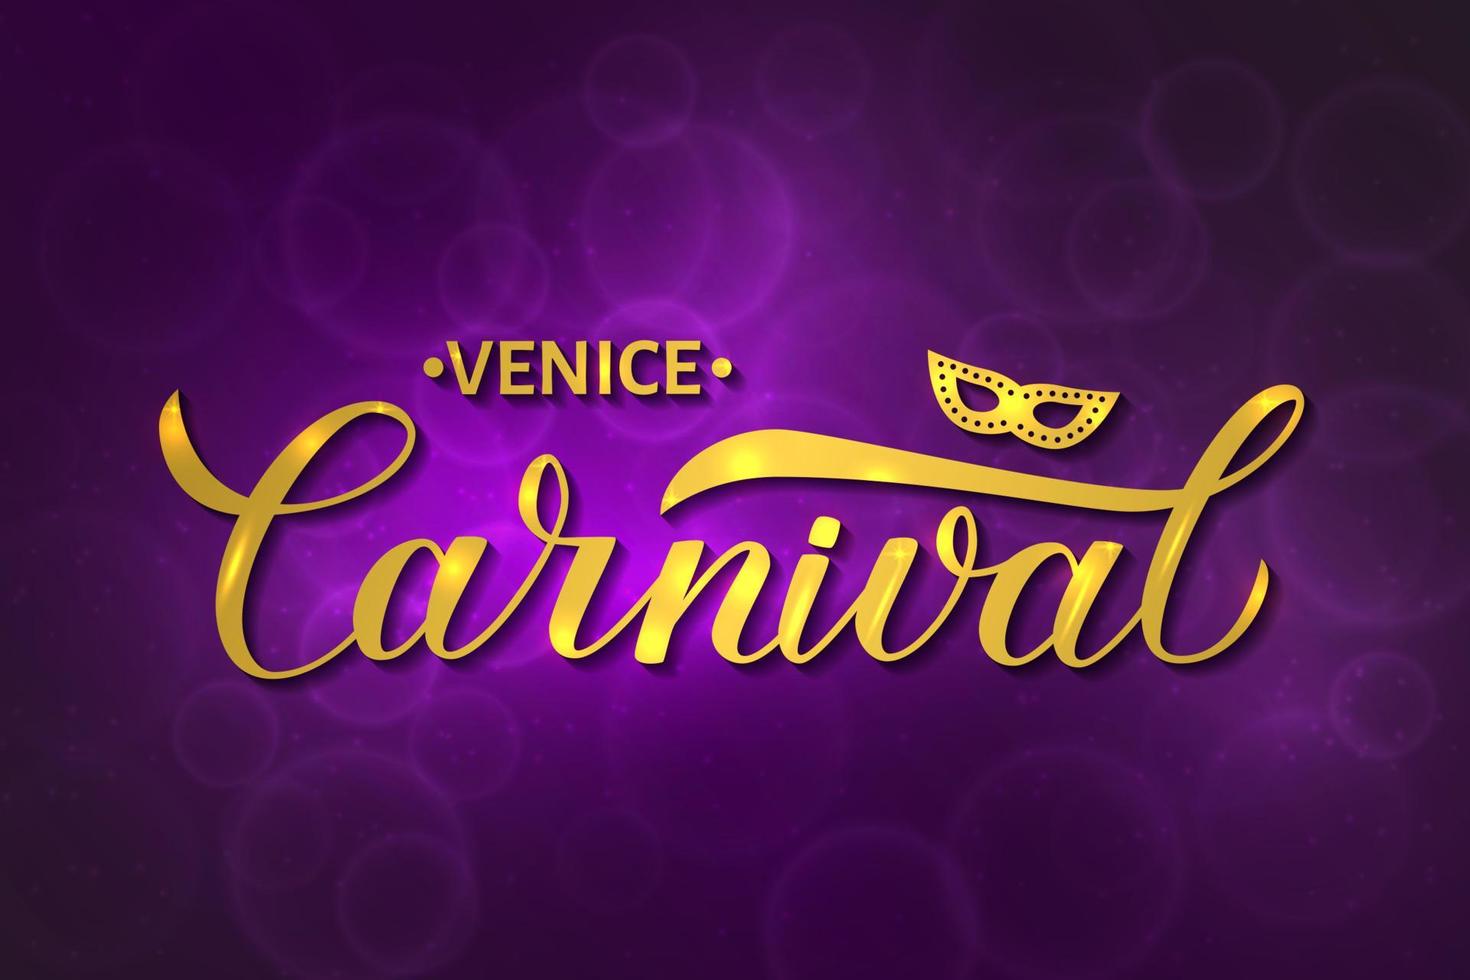 Venice carnival poster. Carnival gold calligraphy lettering with mask on bright purple blurred bokeh background. Masquerade party poster or invitation. Vector illustration. Easy to edit template.